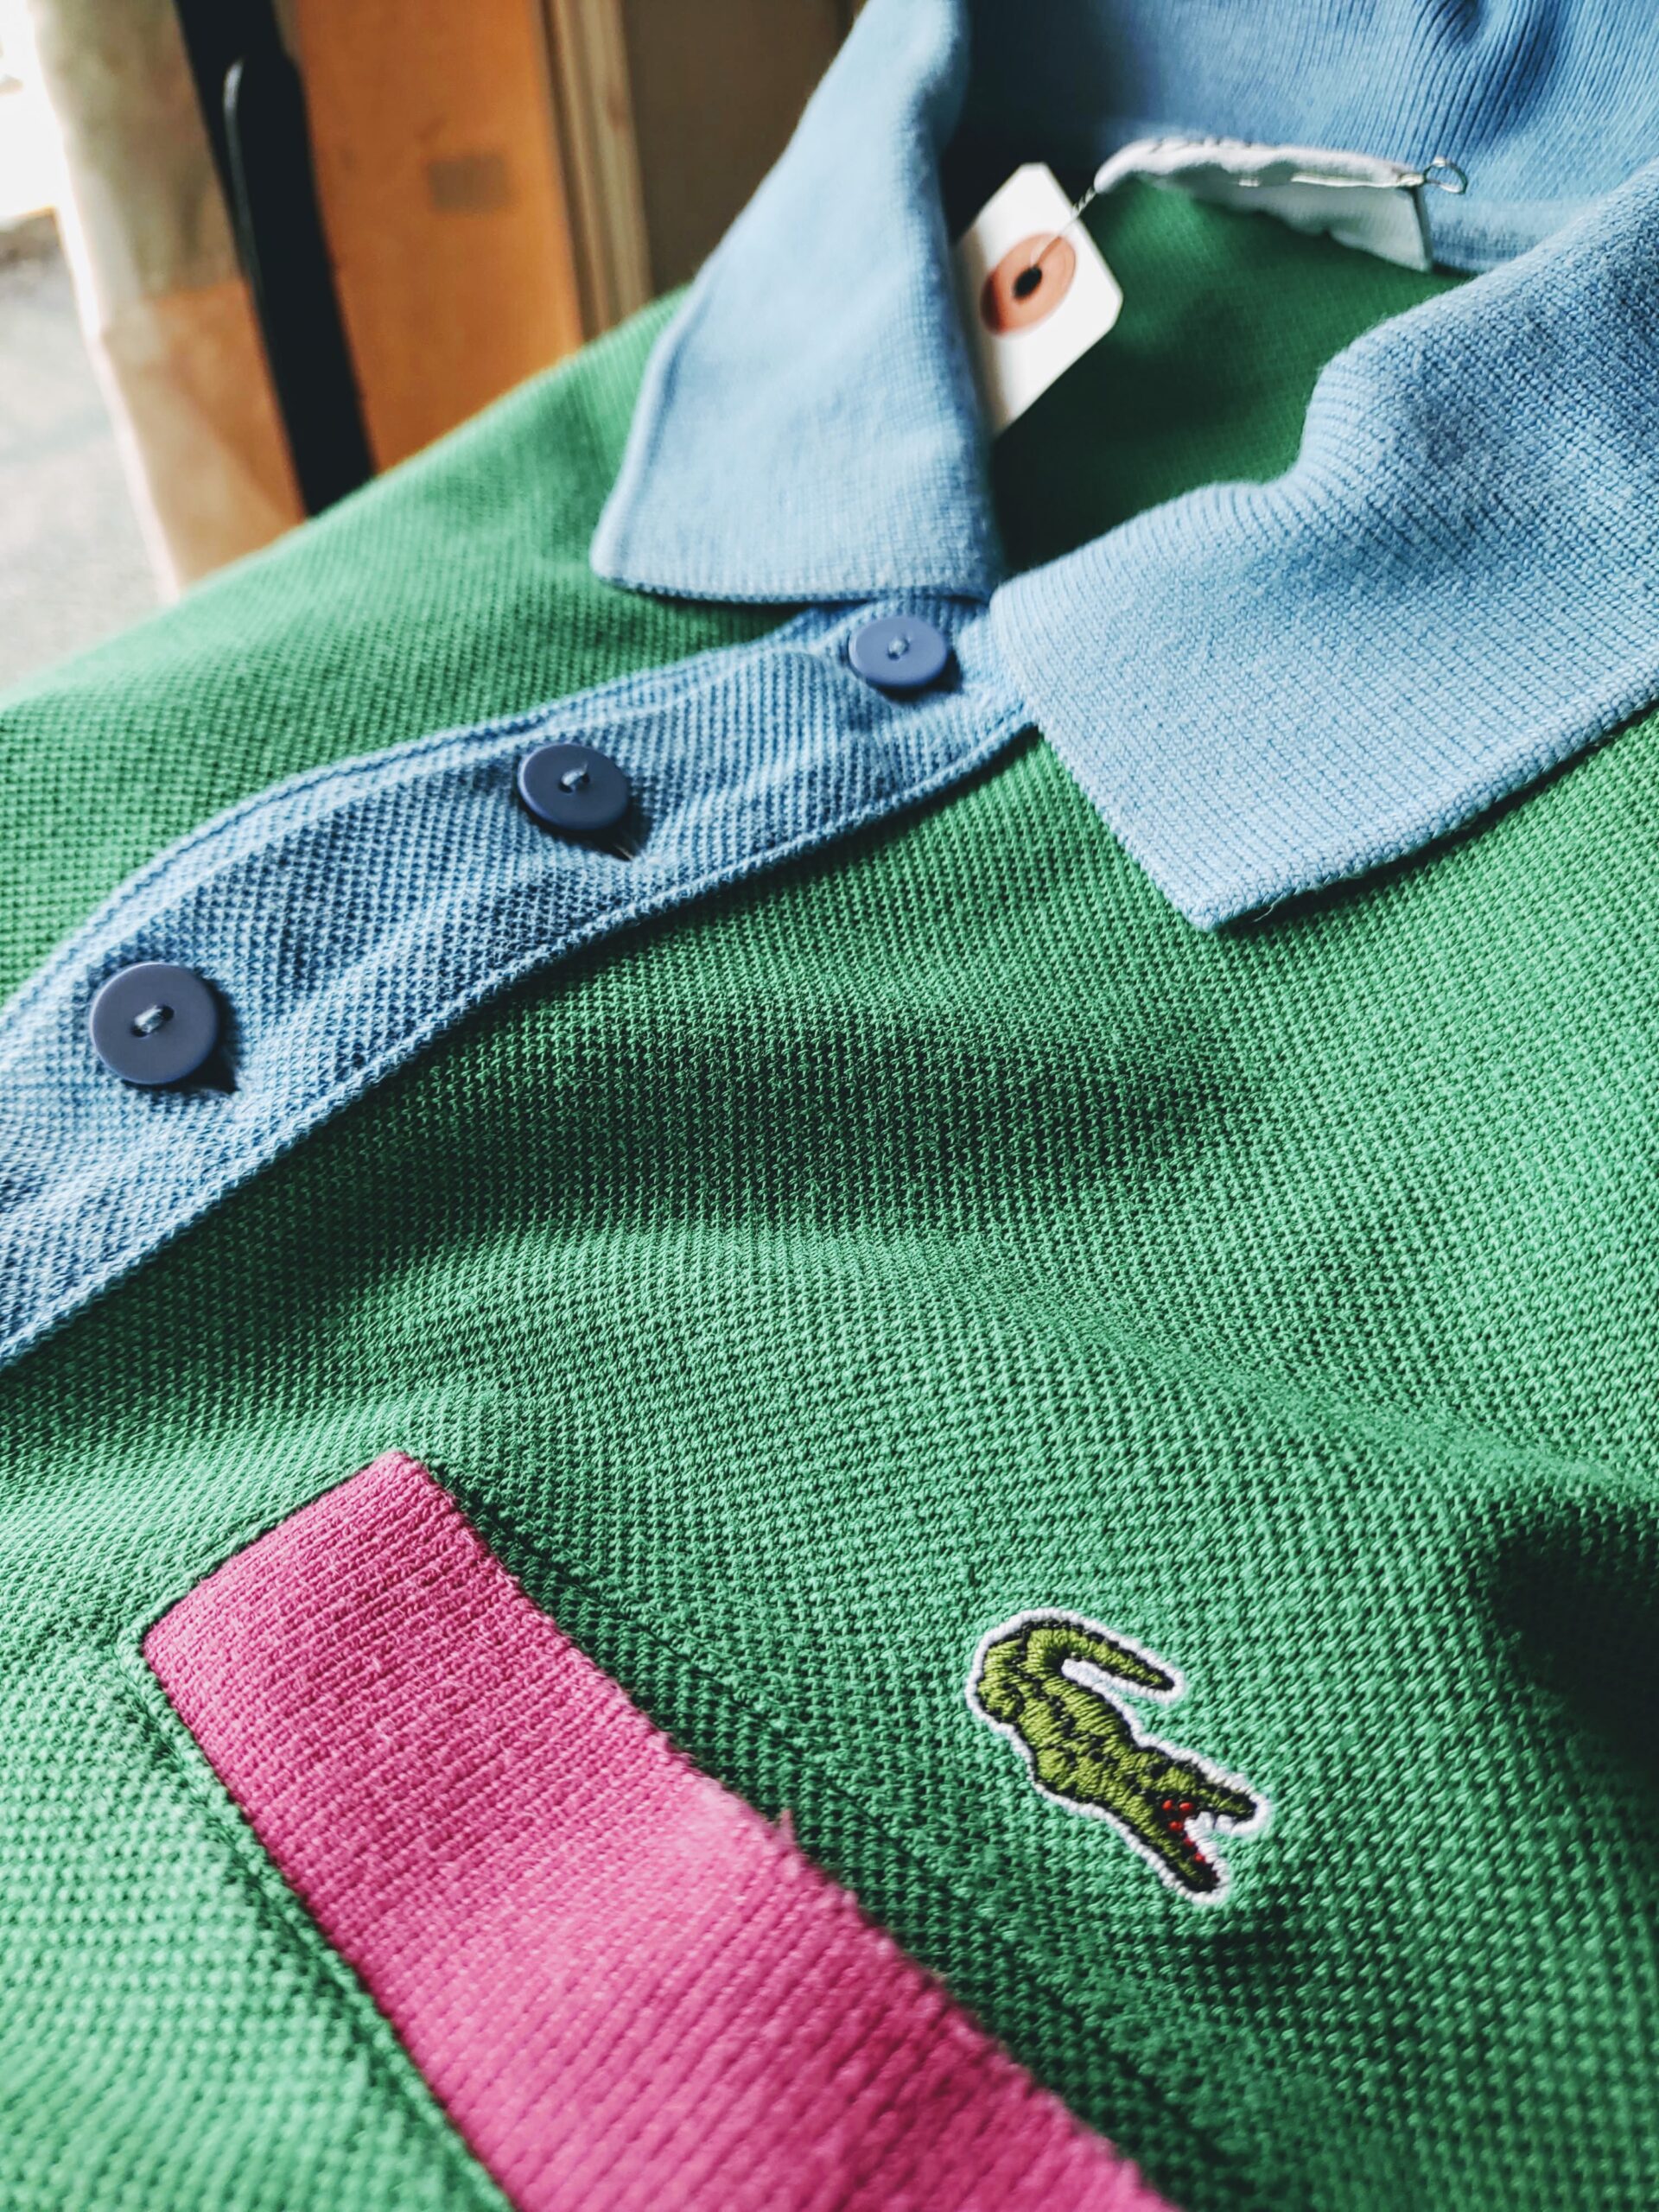 French LACOSTE S/S Crazy Pattern Polo Shirt Mens-M – ataco garage blog